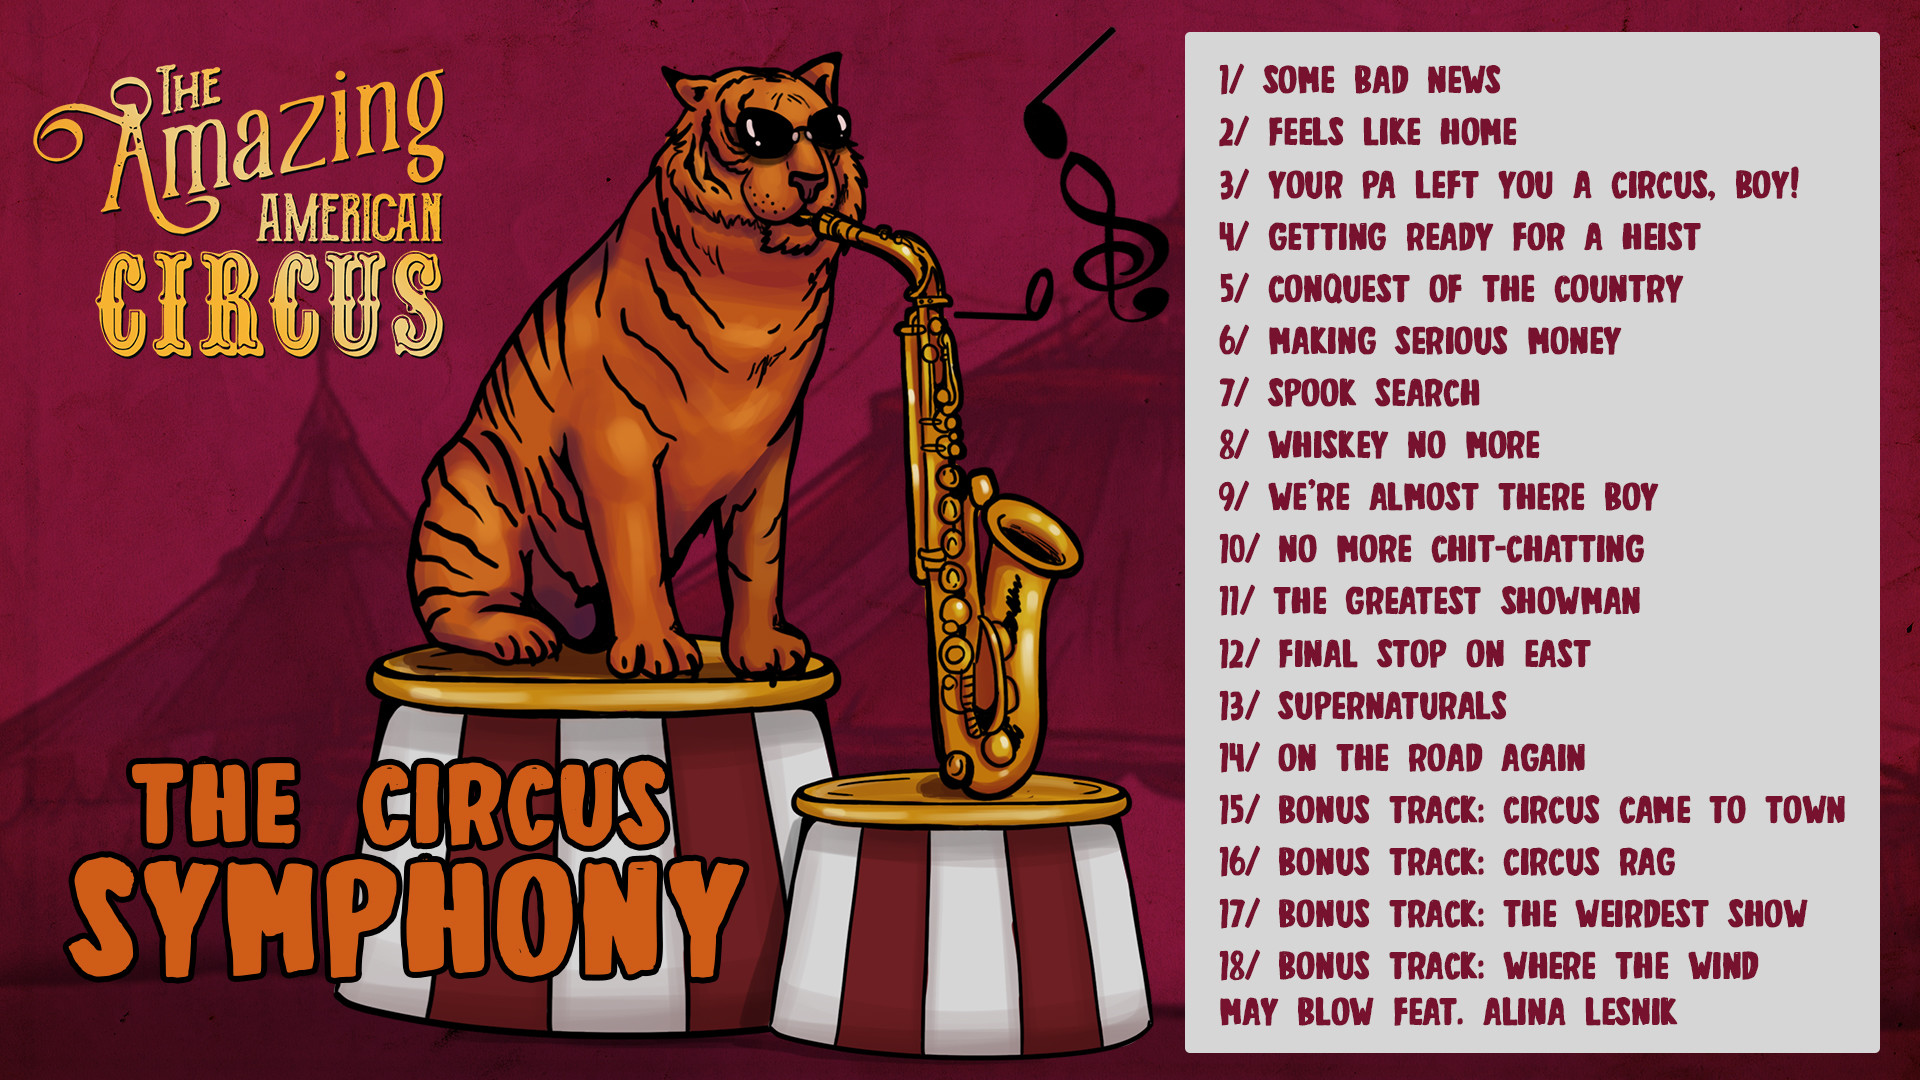 The Amazing American Circus - The Circus Symphony Featured Screenshot #1